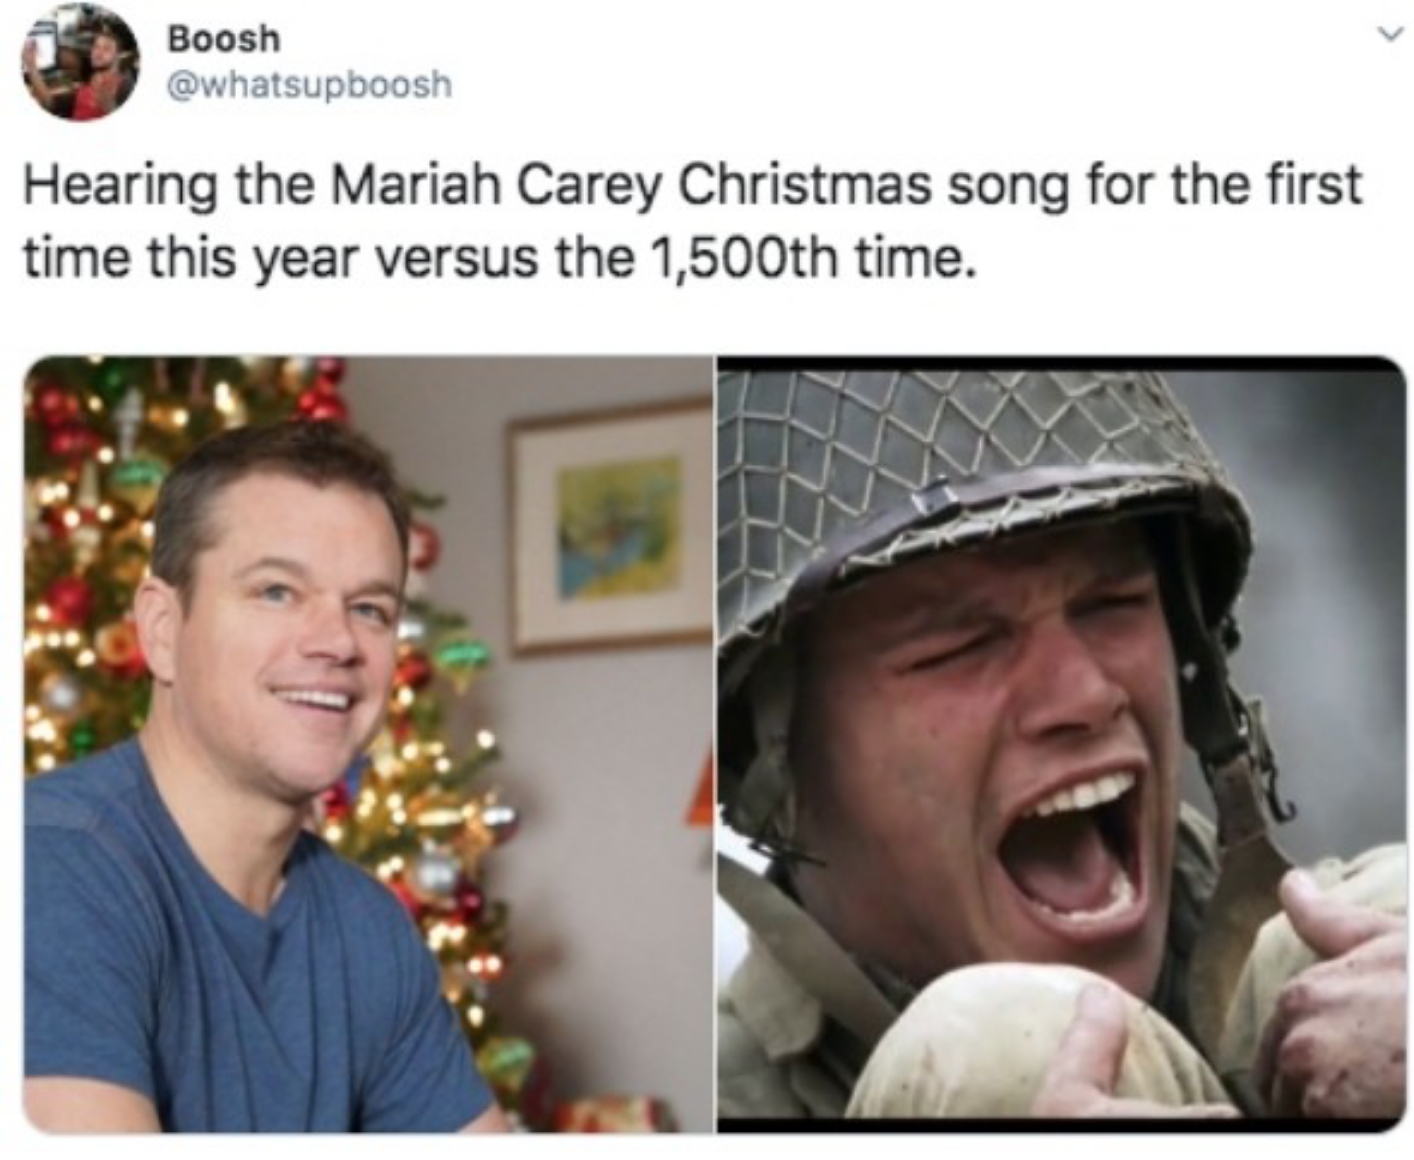 photo caption - Boosh Hearing the Mariah Carey Christmas song for the first time this year versus the 1,500th time.